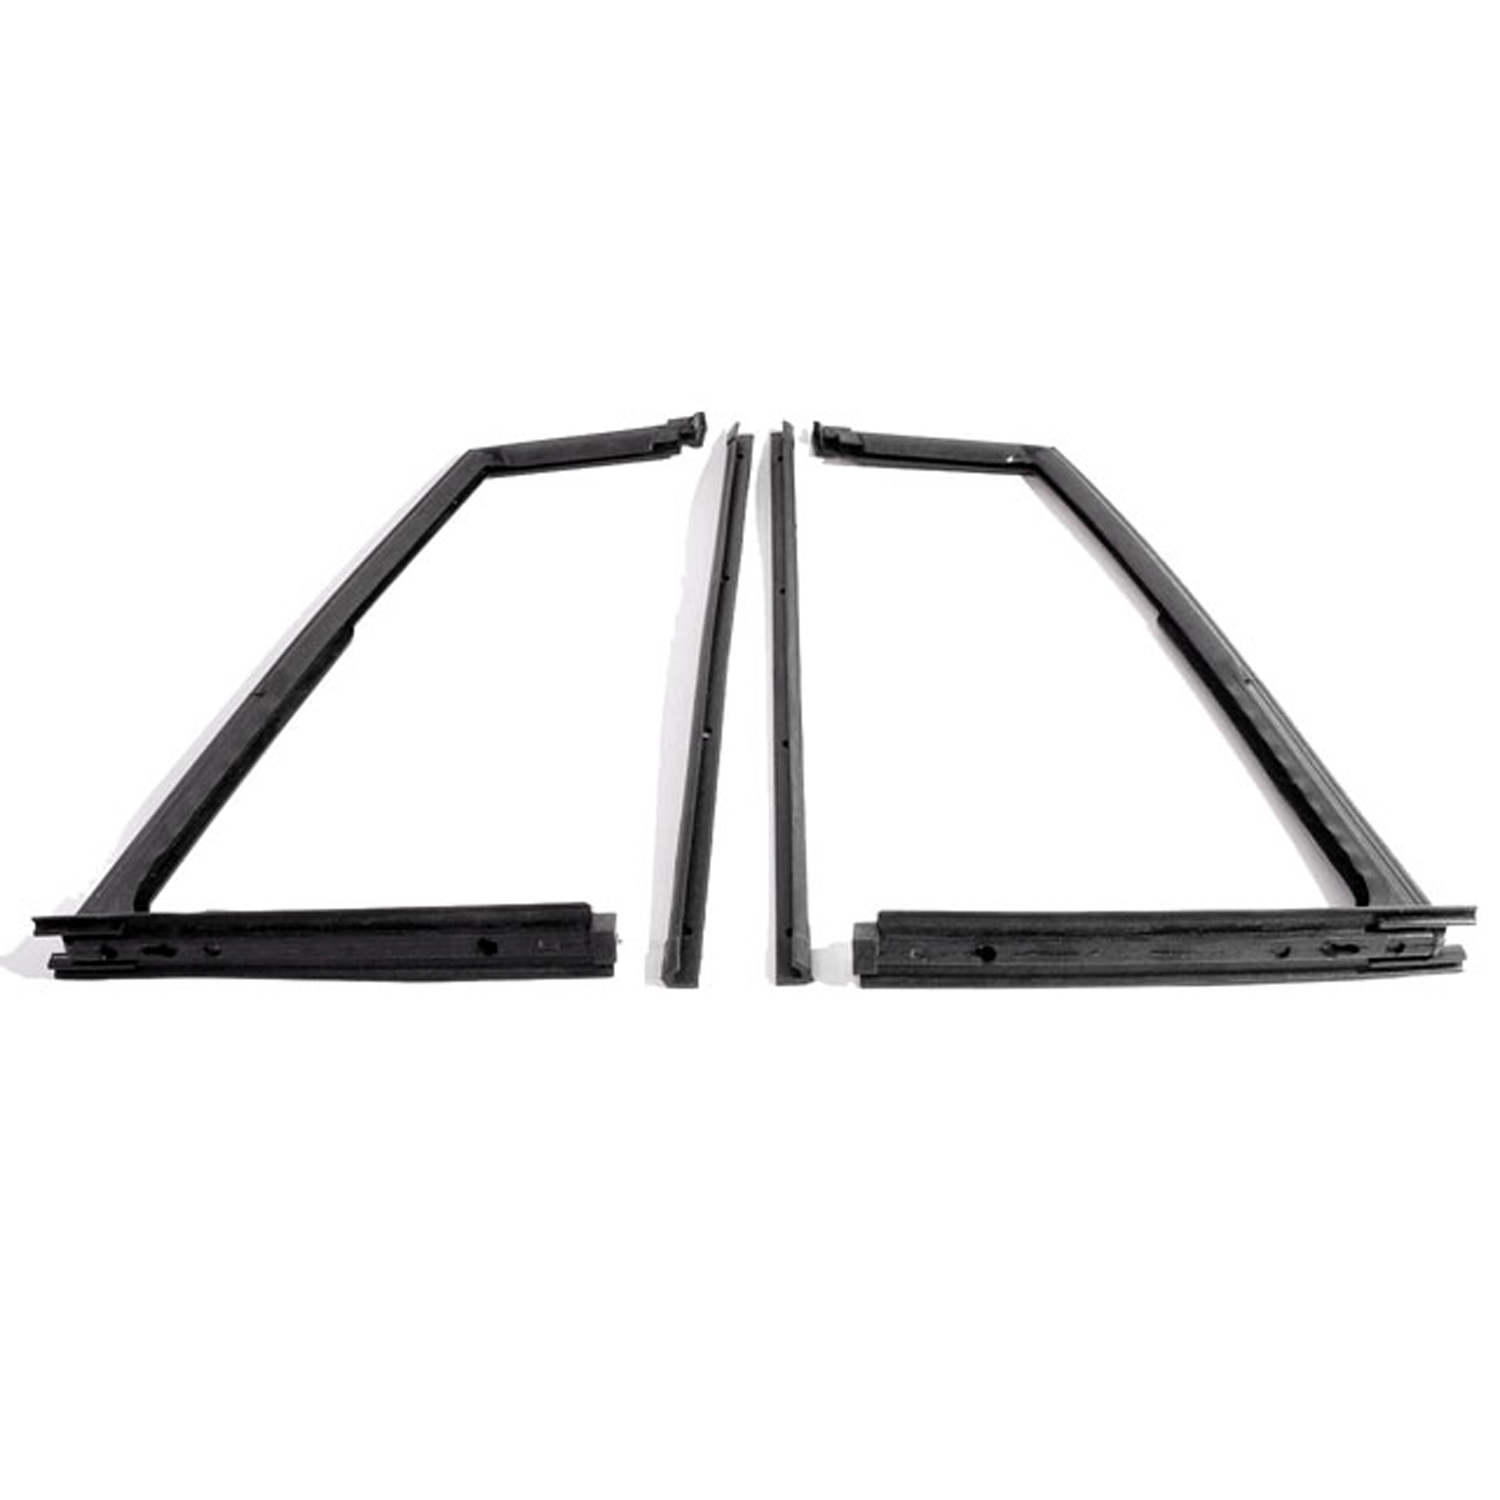 1972 Jeep JEEPSTER Vent Window Seals.  Pair-WR 9700